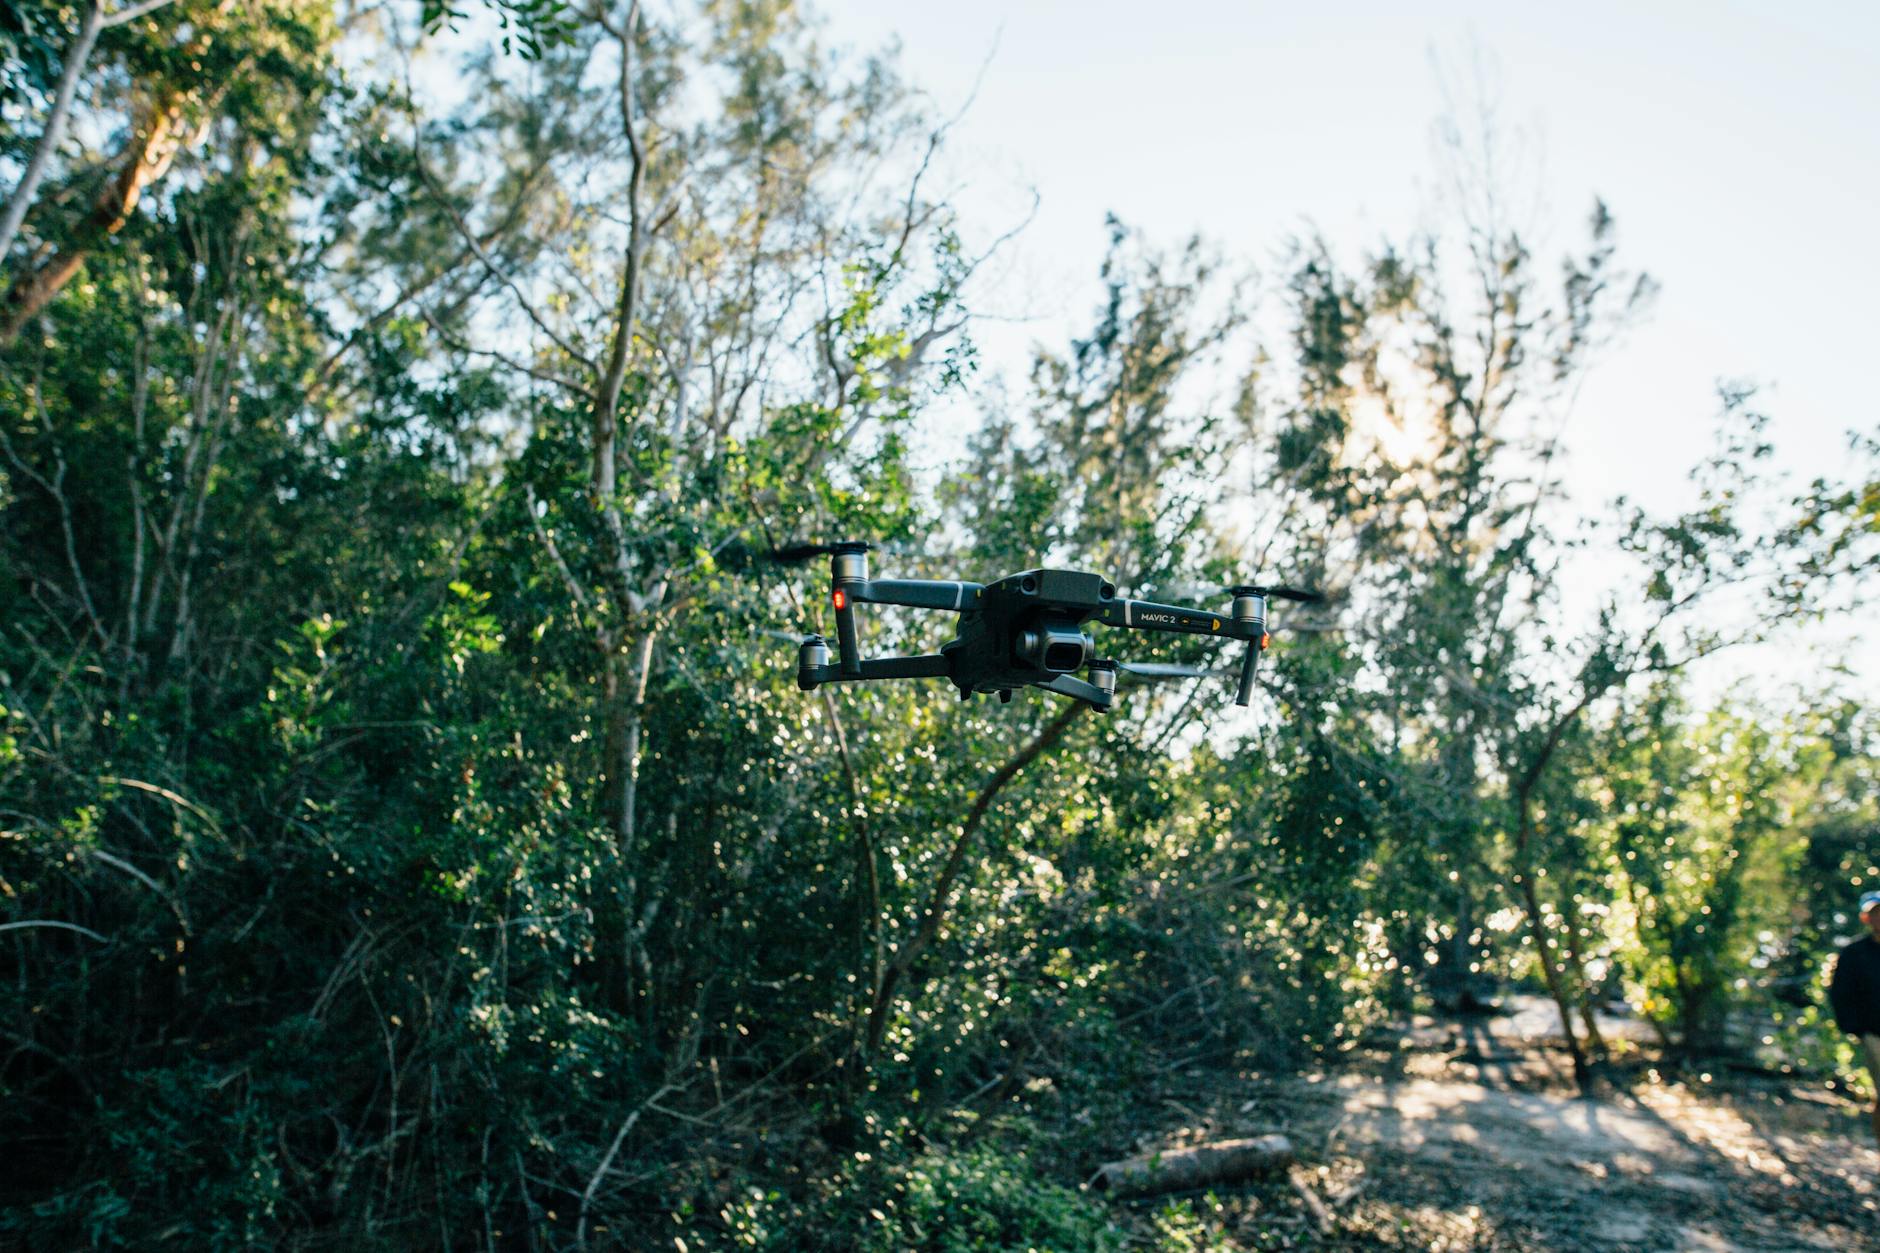 Black Drone Flying · Free Stock Photo